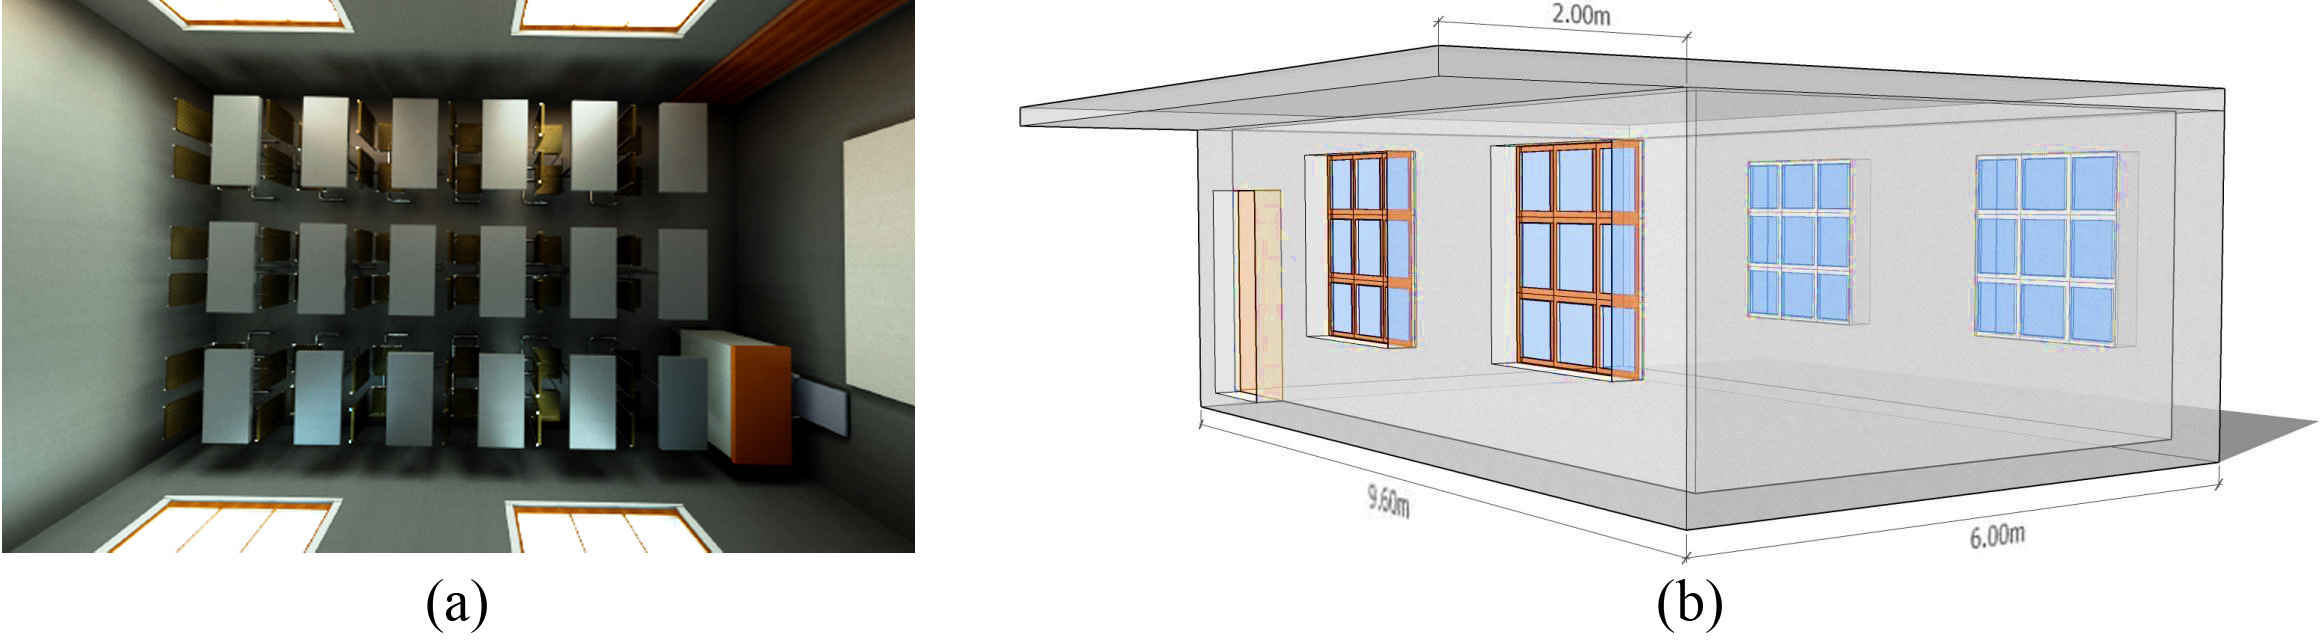 (a) and (b) Geometric 3D Model typology of Typical Classroom (bilateral lighting mode) used in simulation.